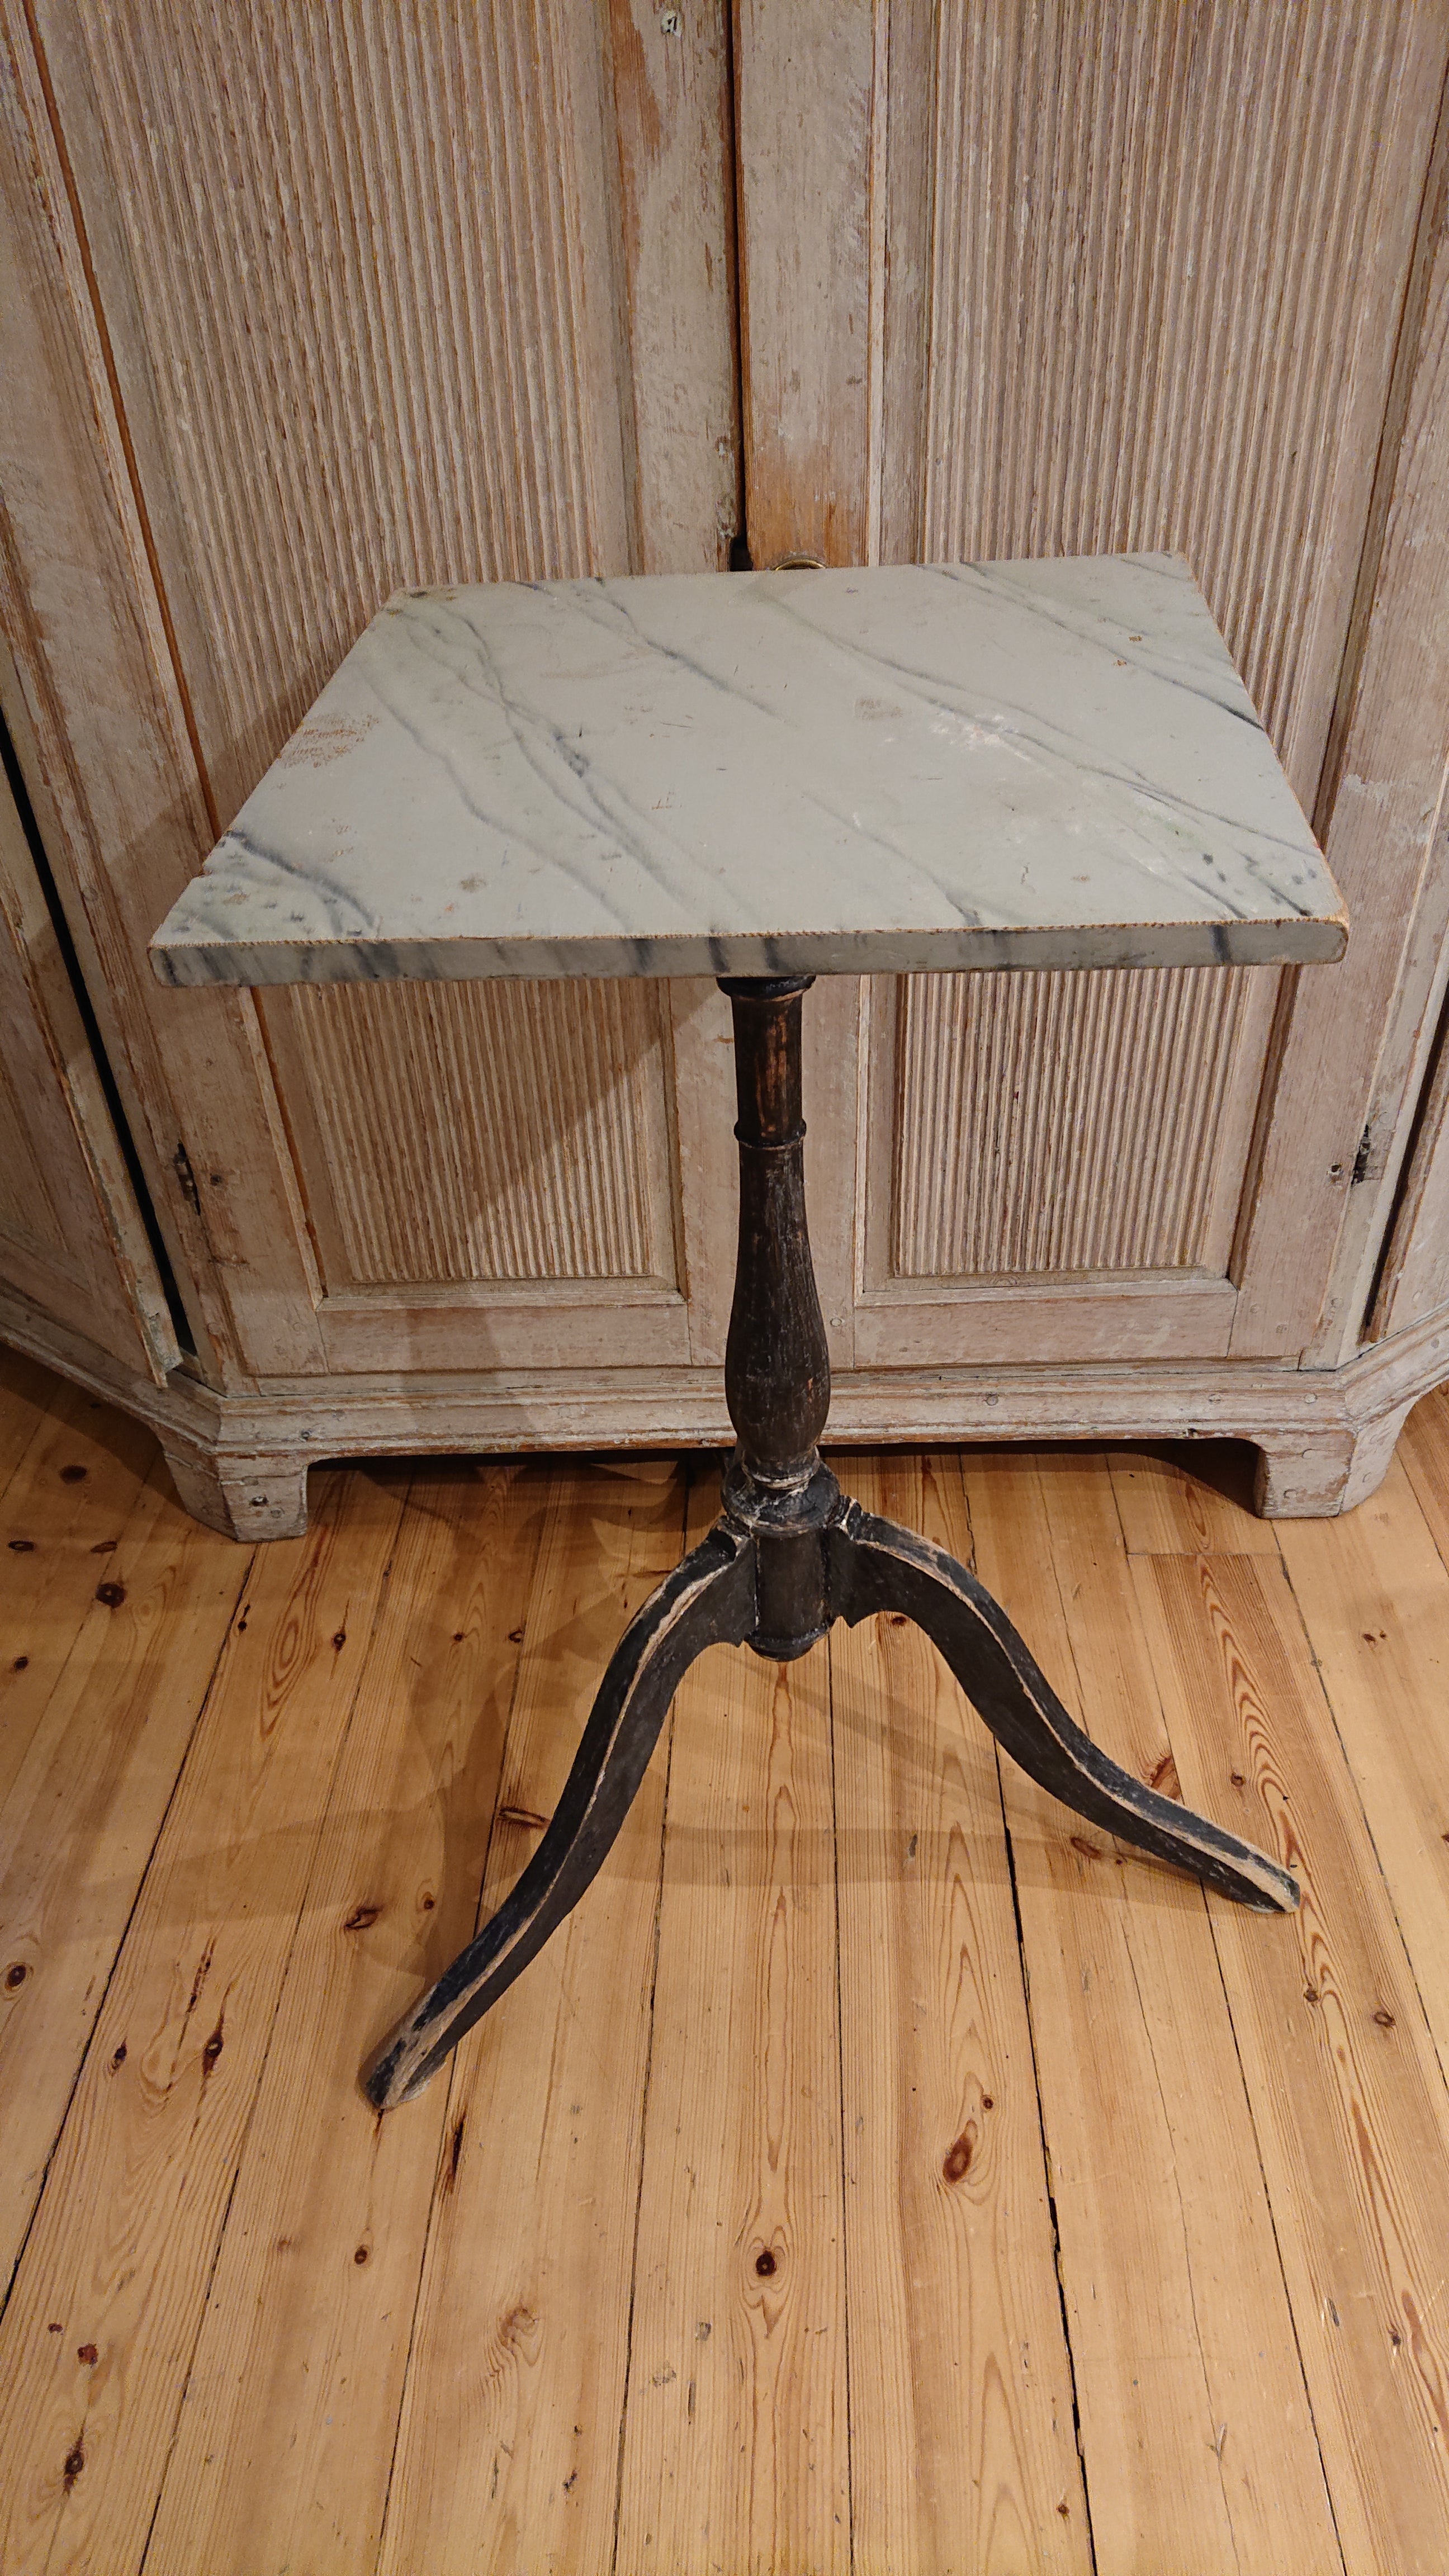 Early 19th Century Swedish Gustavian Pedestal table from Boden Norrbotten, Northern Sweden.
A charming classic early 19th Century Swedish Pedestal table with turned base supported by beautifully carved legs.
The top is untouched originalpaint with